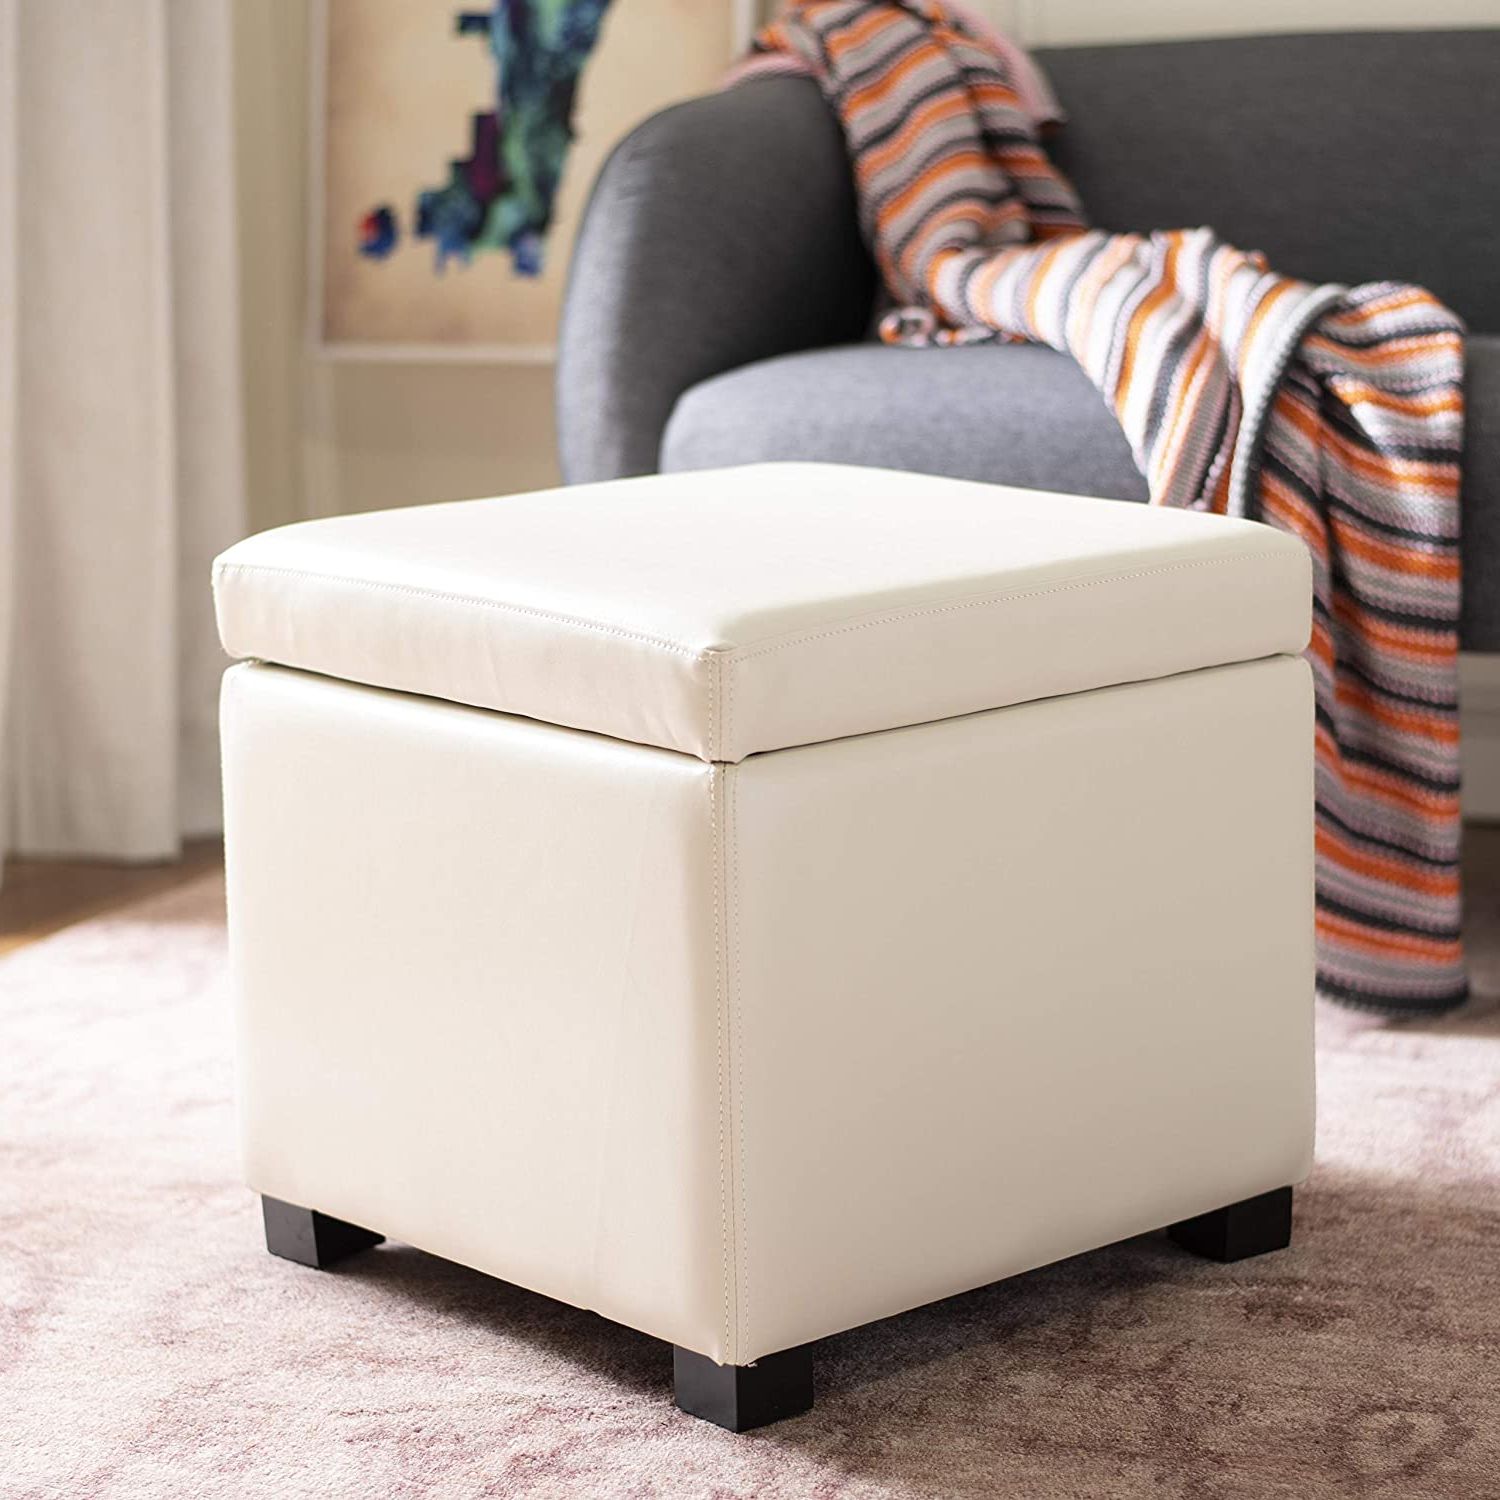 Fashionable Amazon: Safavieh Hudson Collection Ryder Leather Square Flip Top Within White Wool Square Pouf Ottomans (View 1 of 10)